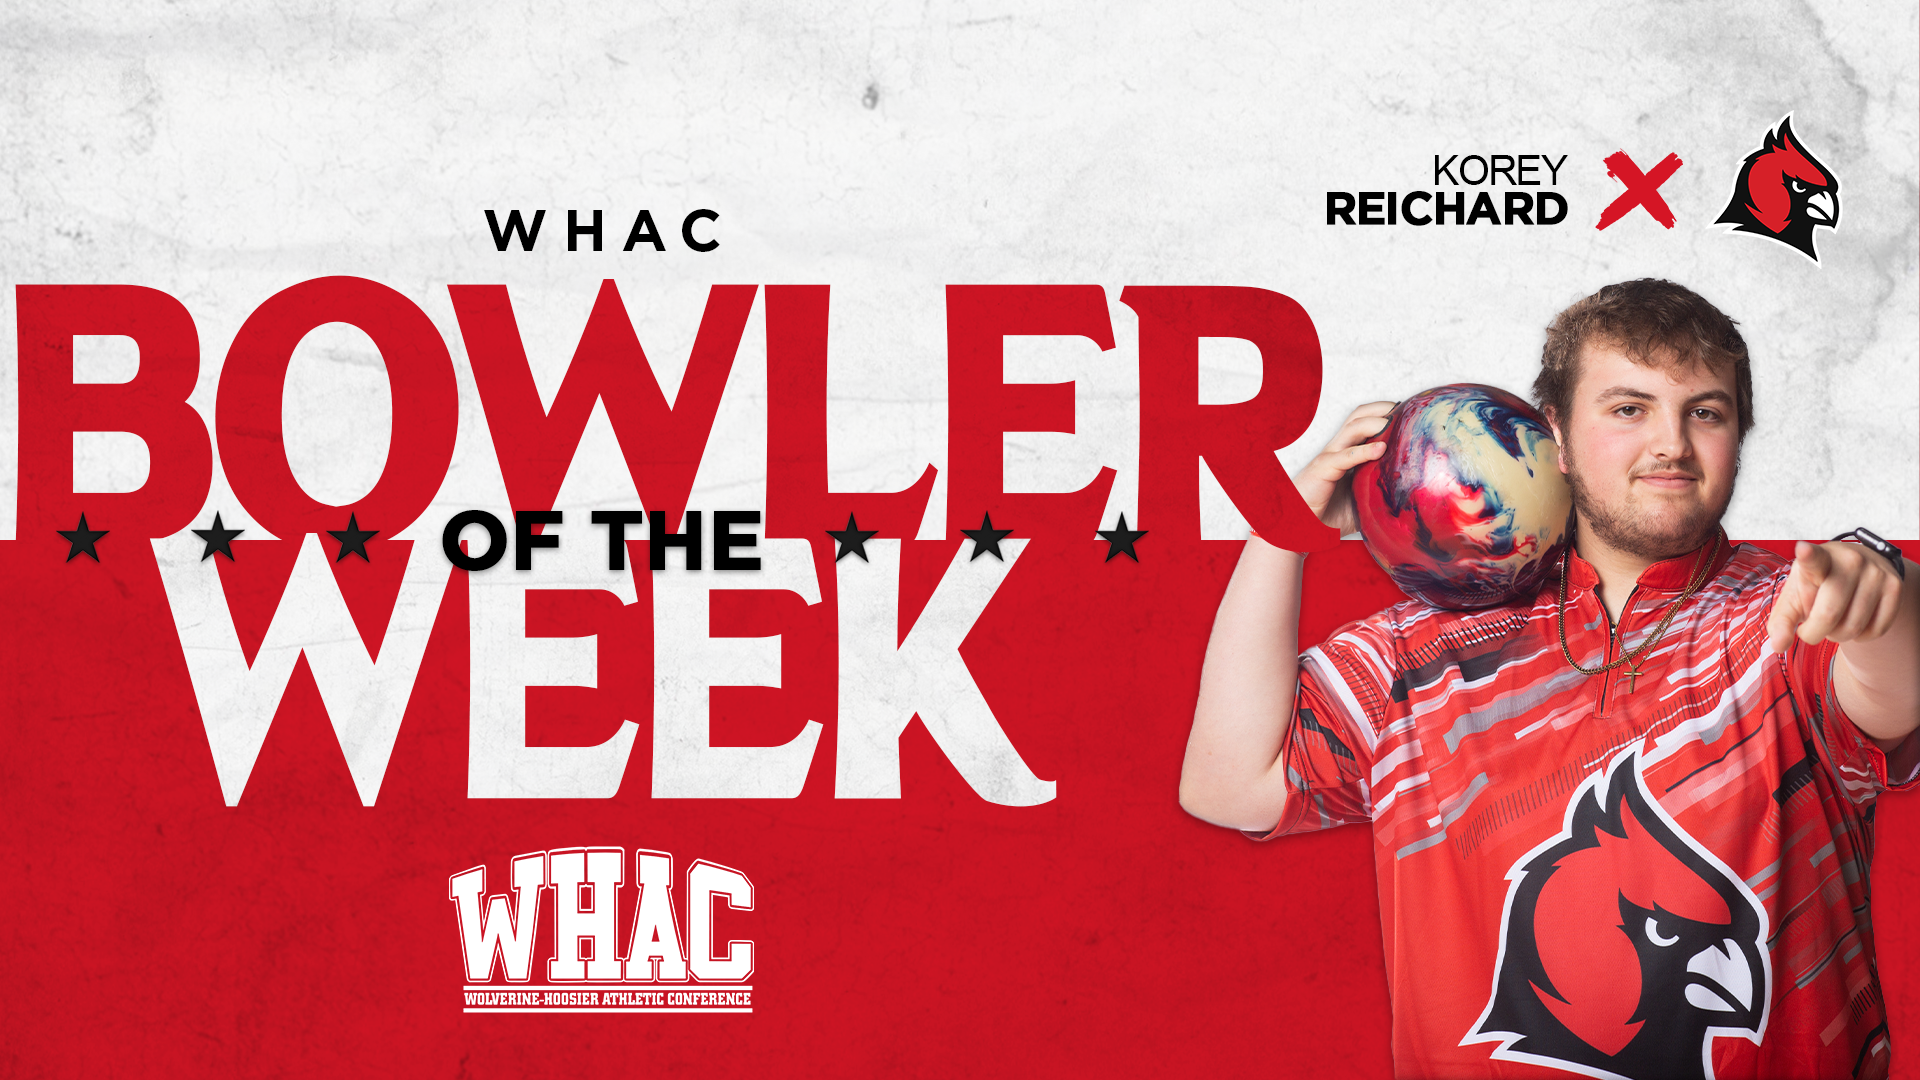 Reichard secures fourth WHAC Bowler of the Week Honors